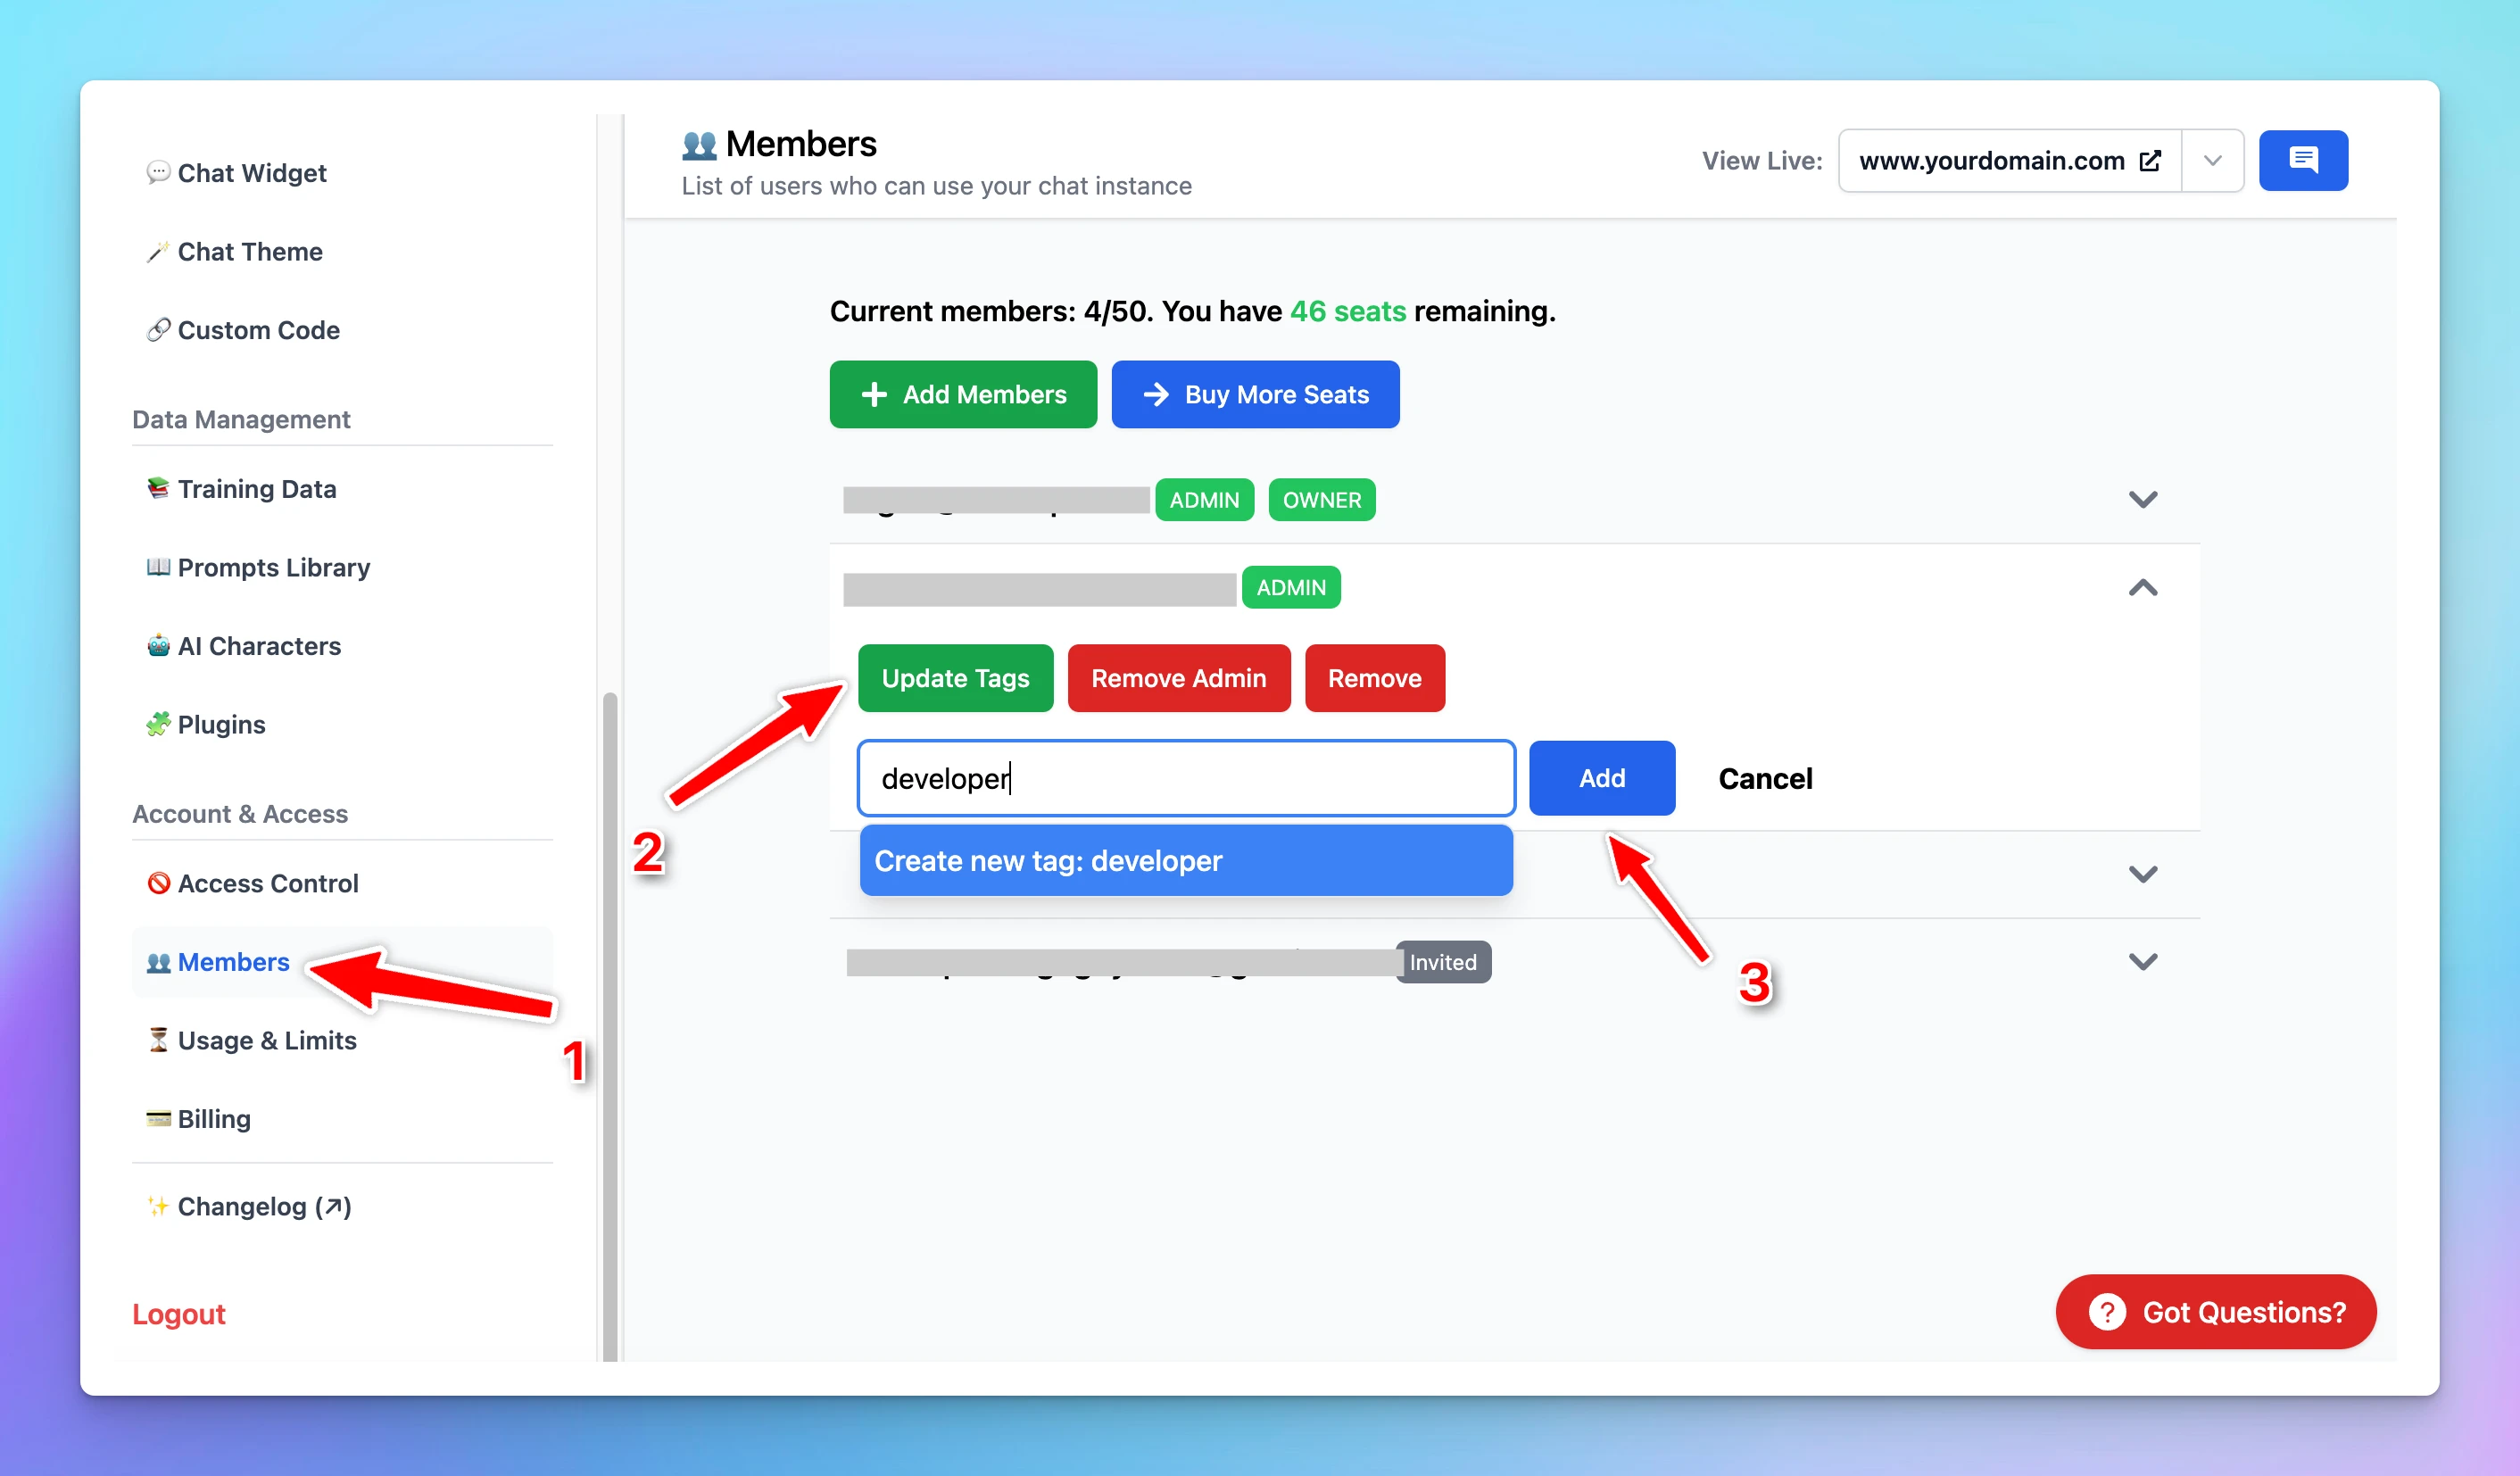 Assign tags and manage access for individuals in your team